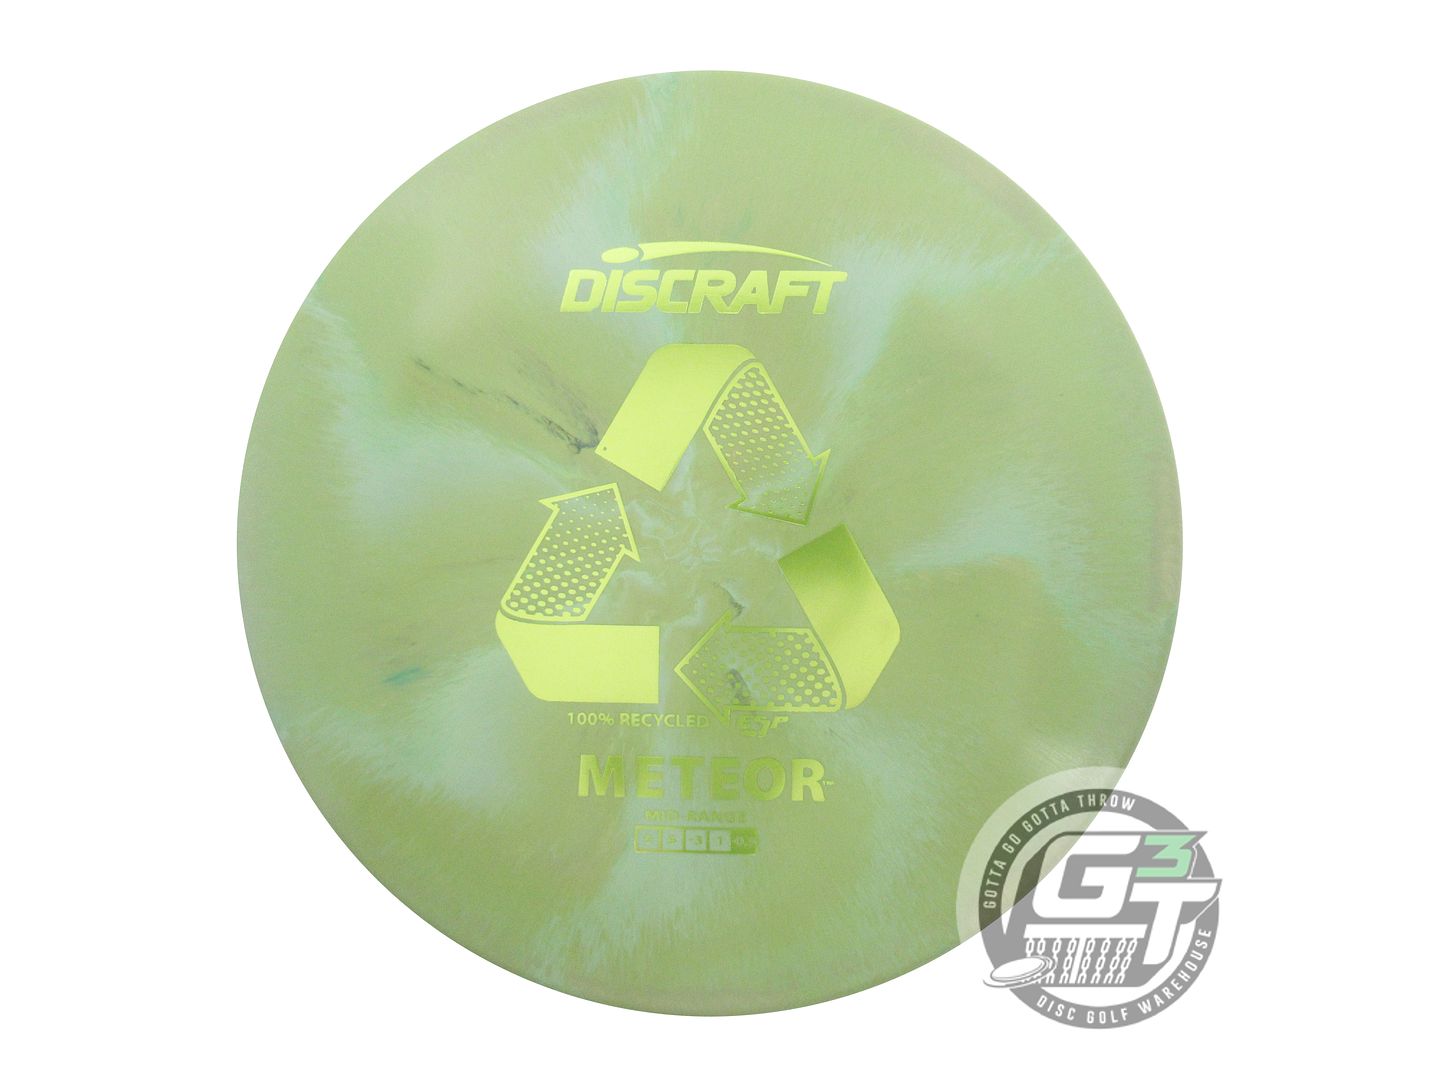 Discraft Recycled ESP Meteor Midrange Golf Disc (Individually Listed)